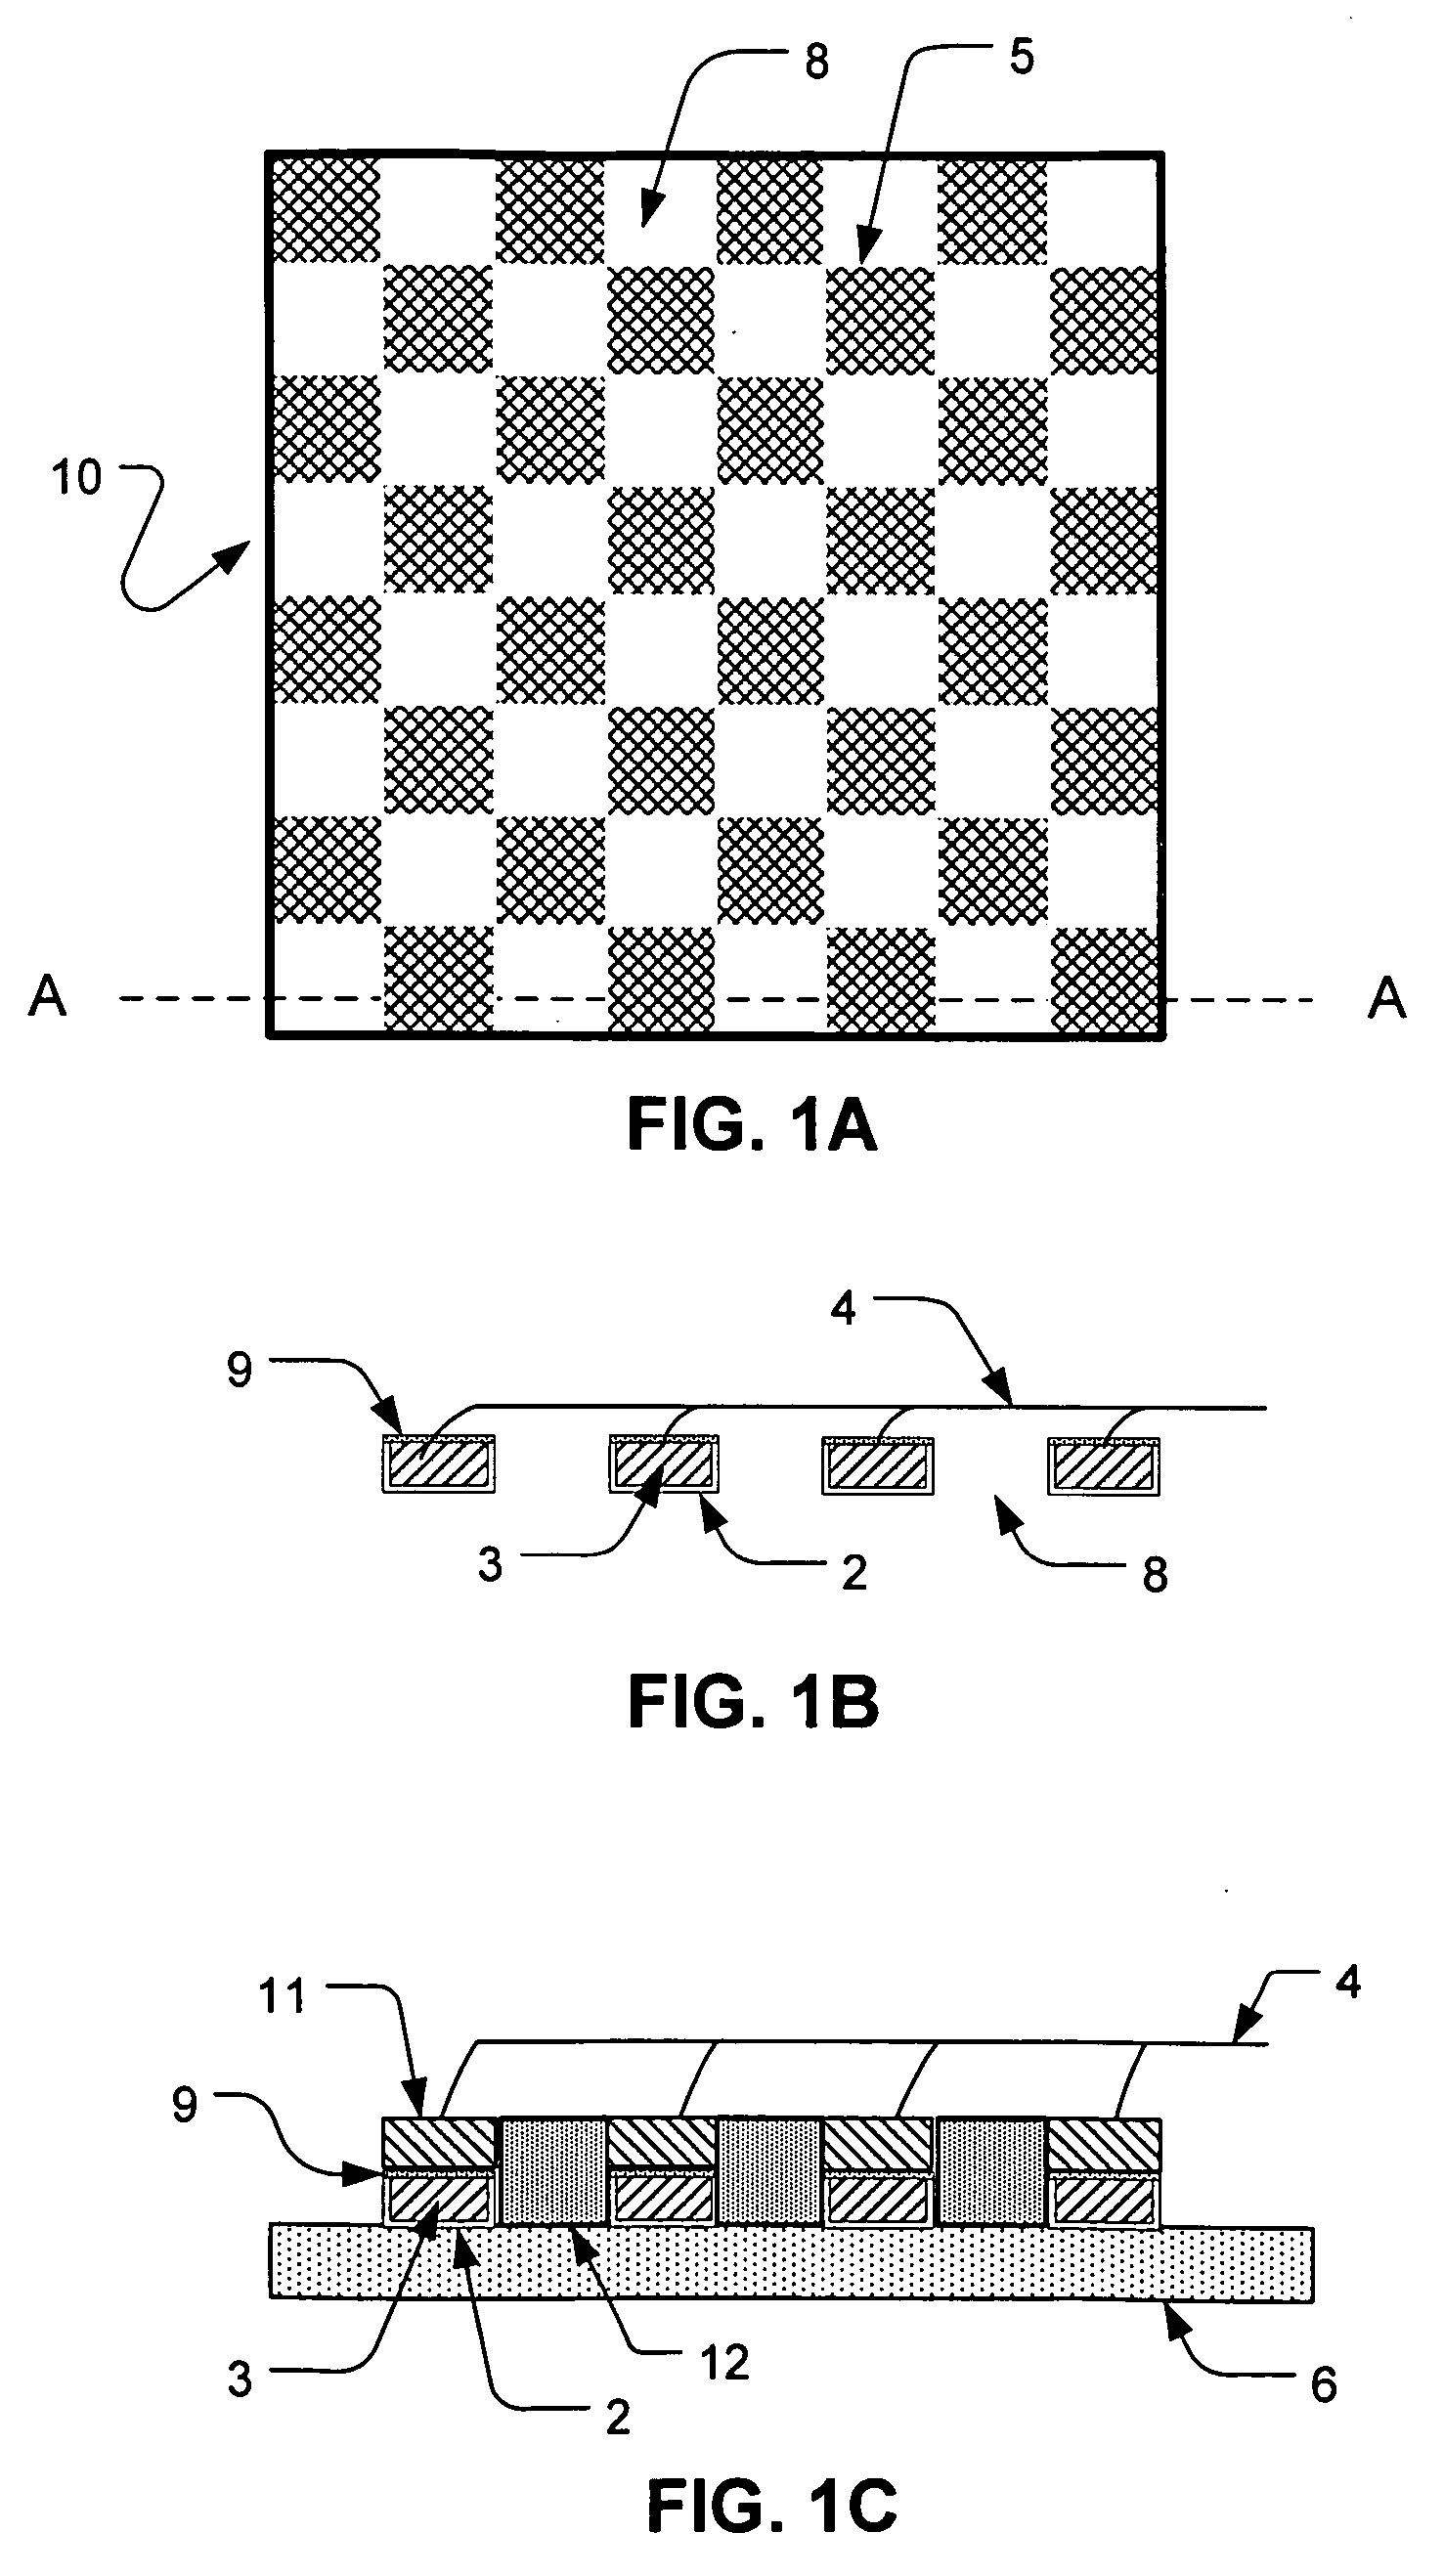 Electrodes for applying an electric field in-vivo over an extended period of time